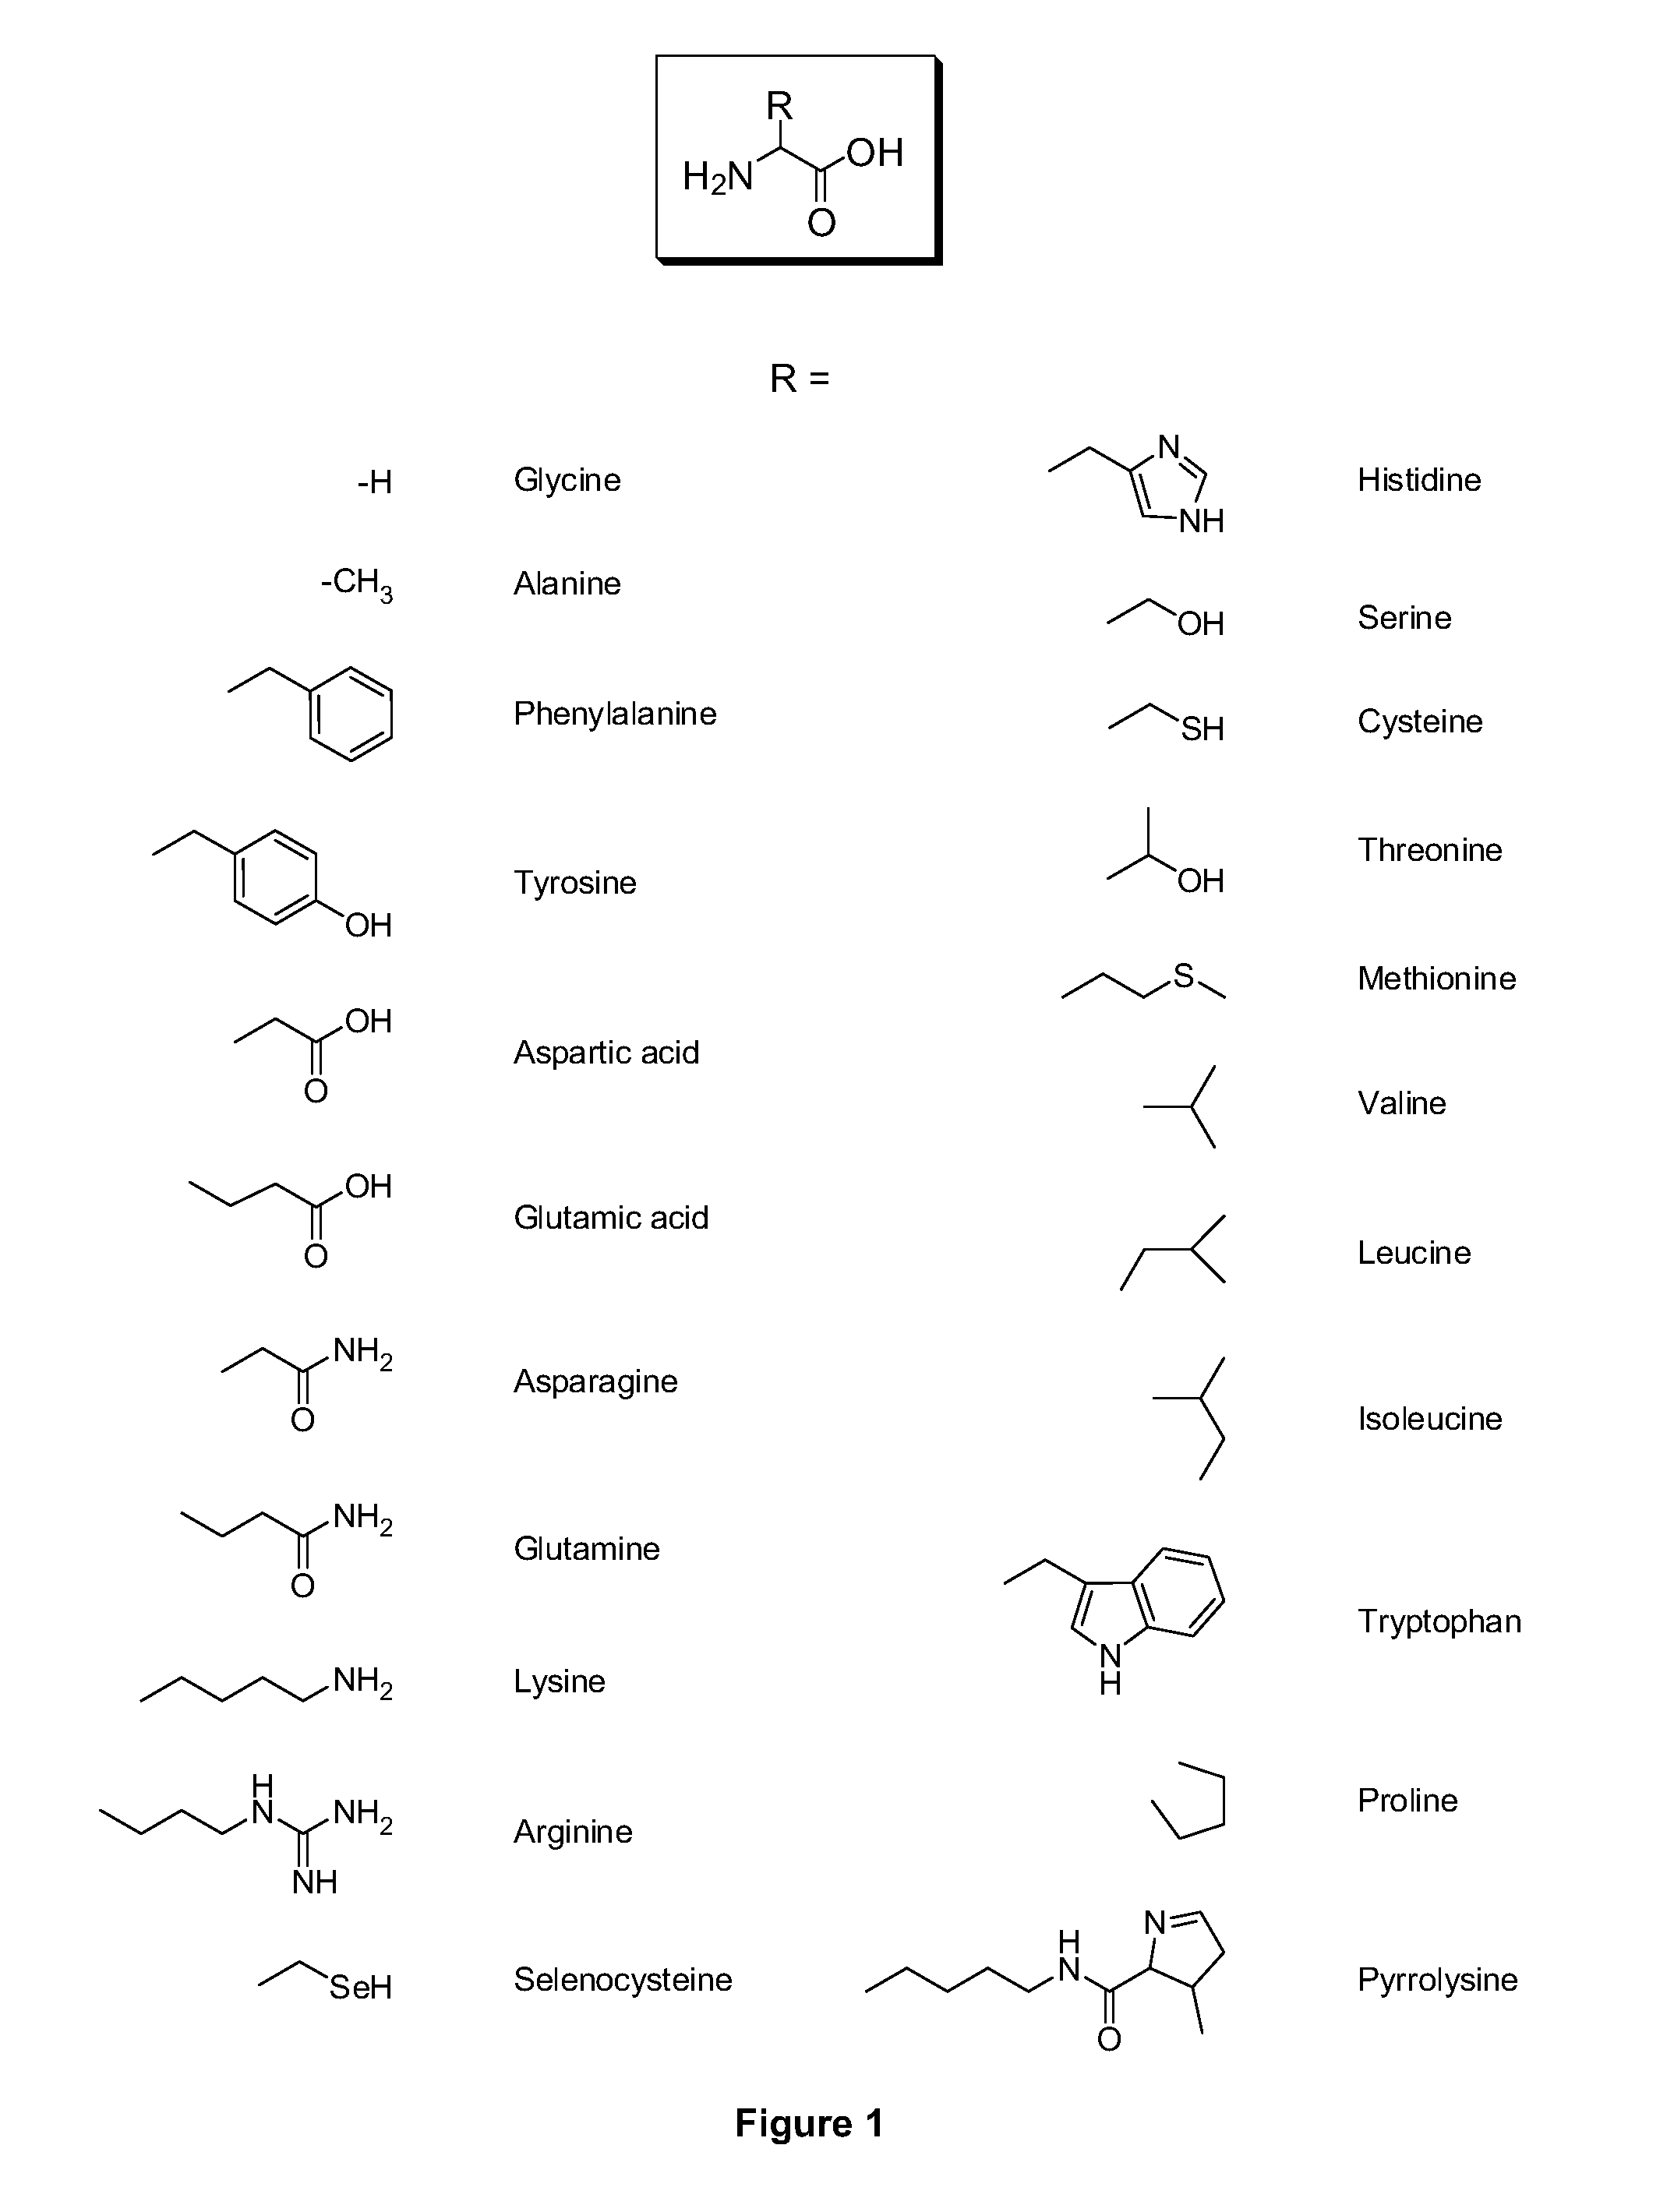 Amino acid conjugates of quetiapine, process for making and using the same